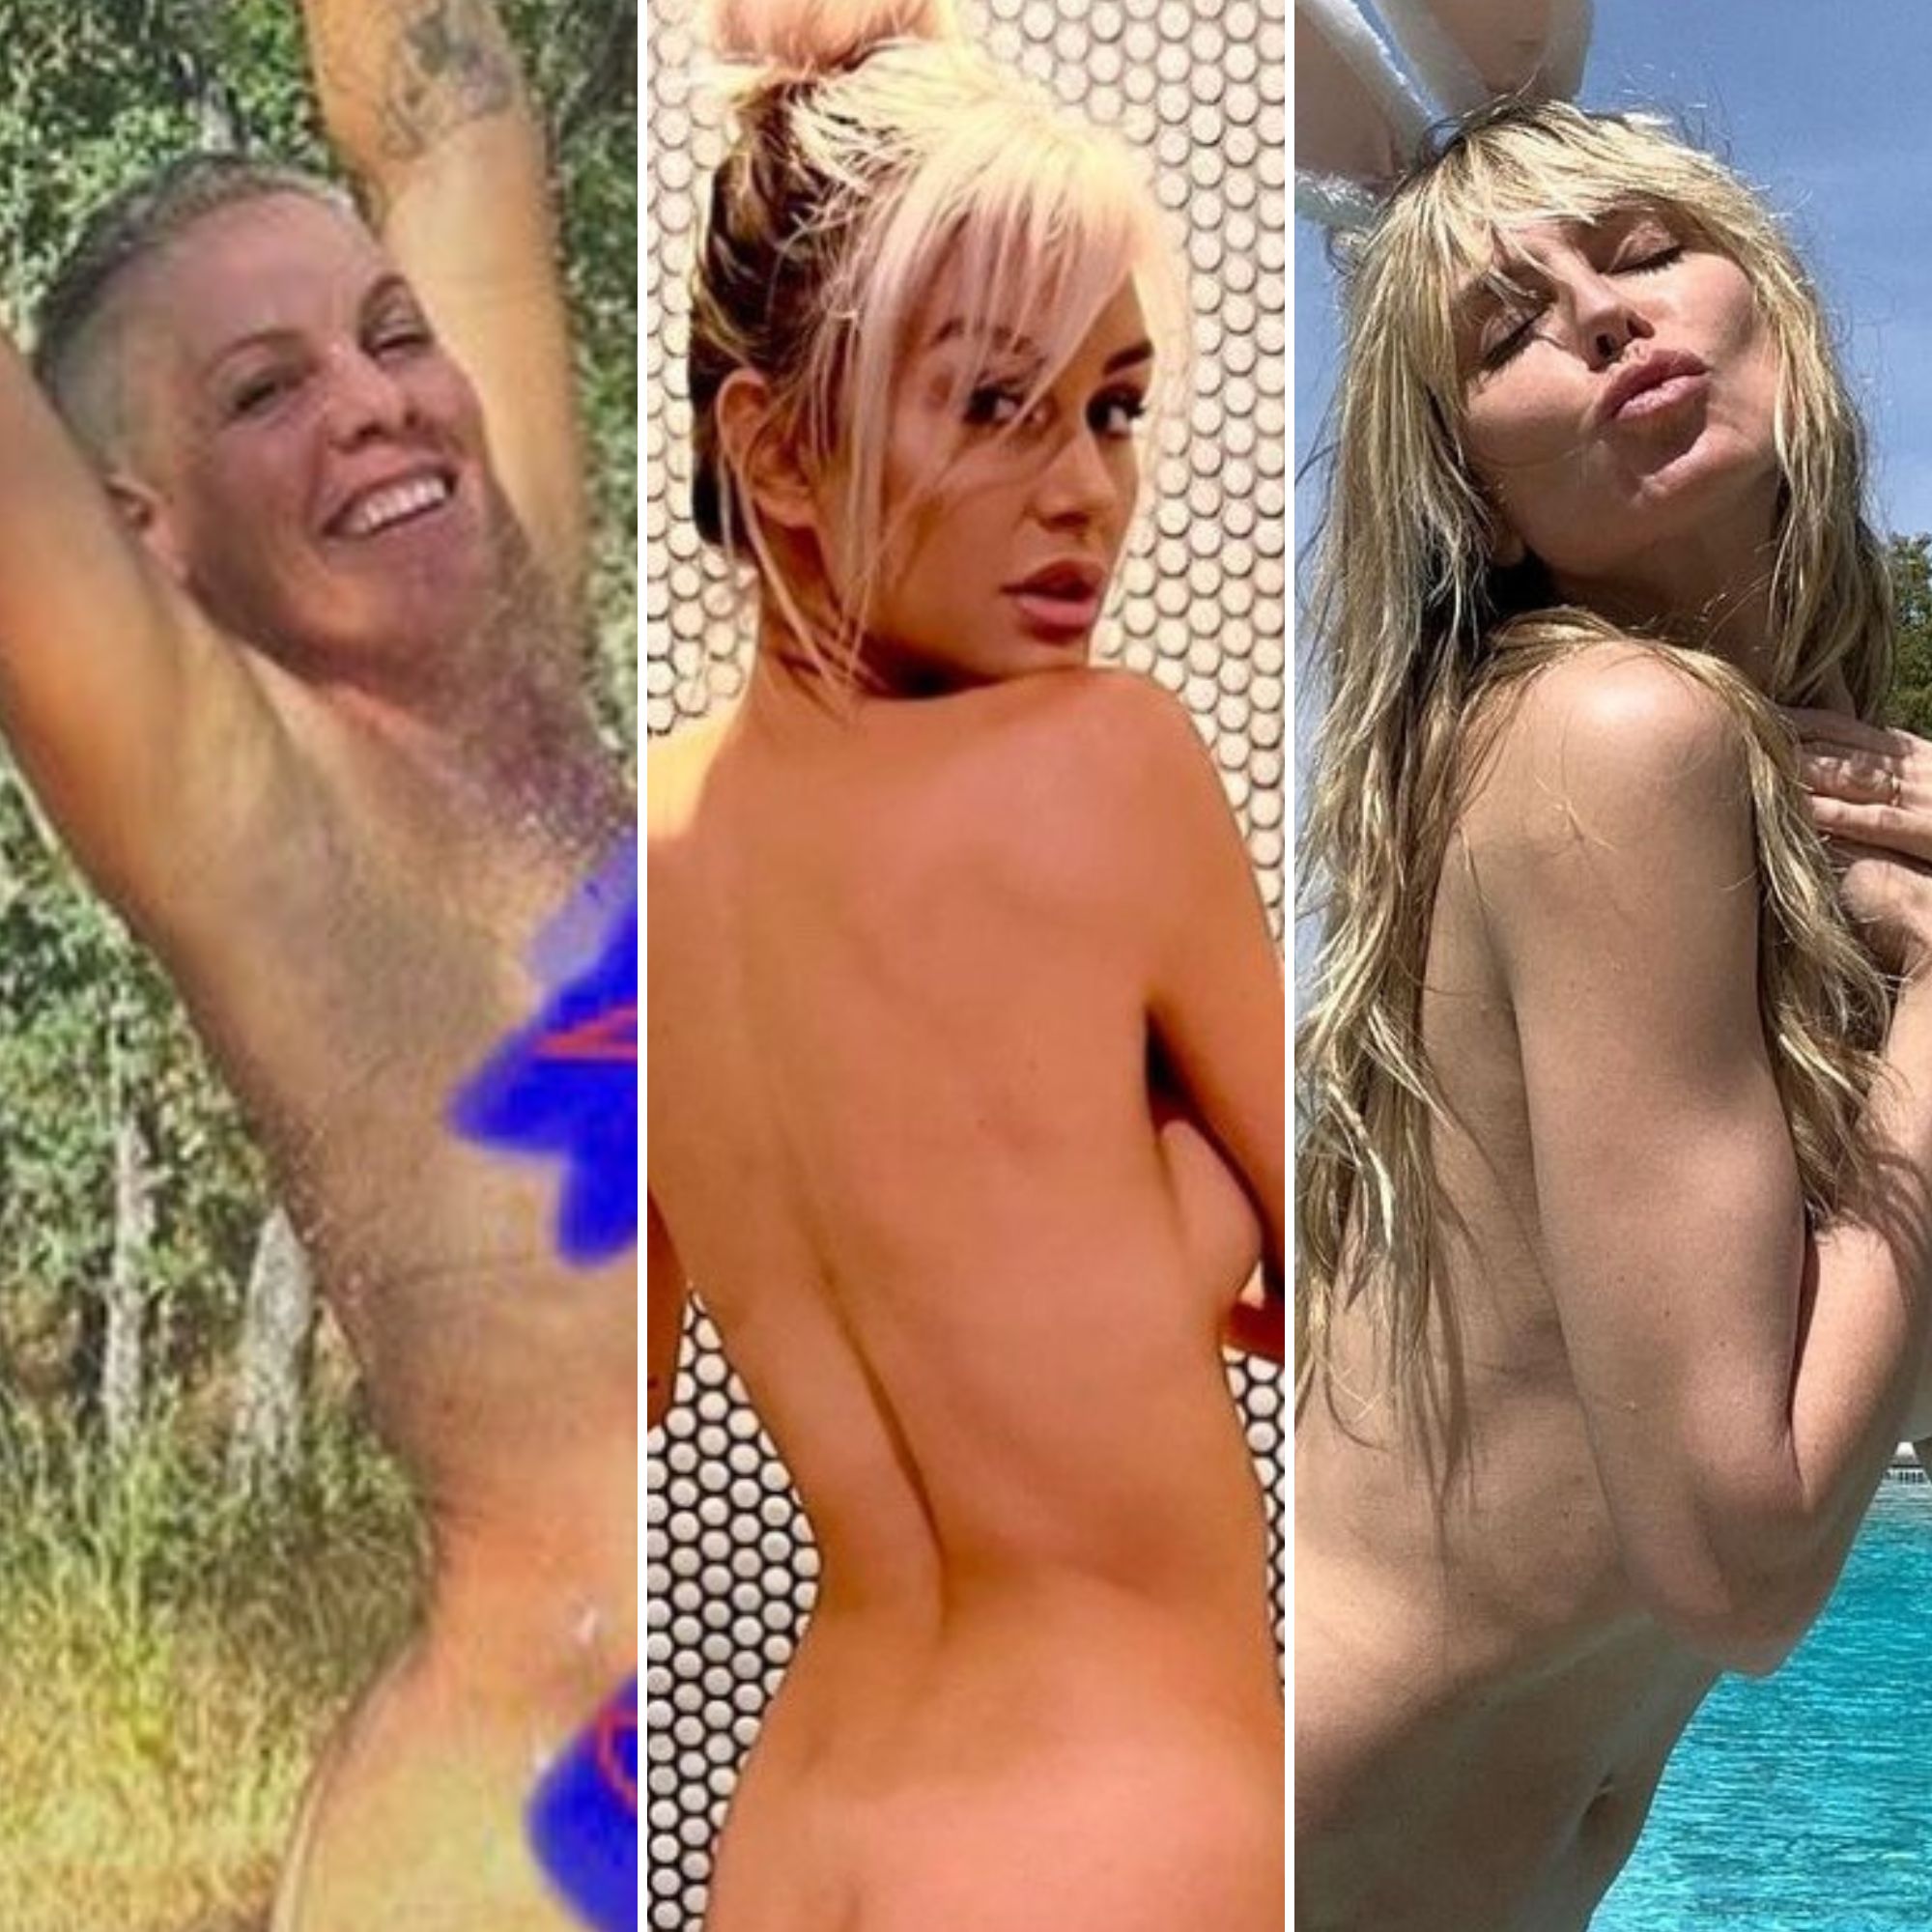 Famous Home Naked - Celebrities Who Post Nude Photos: See Naked Pictures of Stars